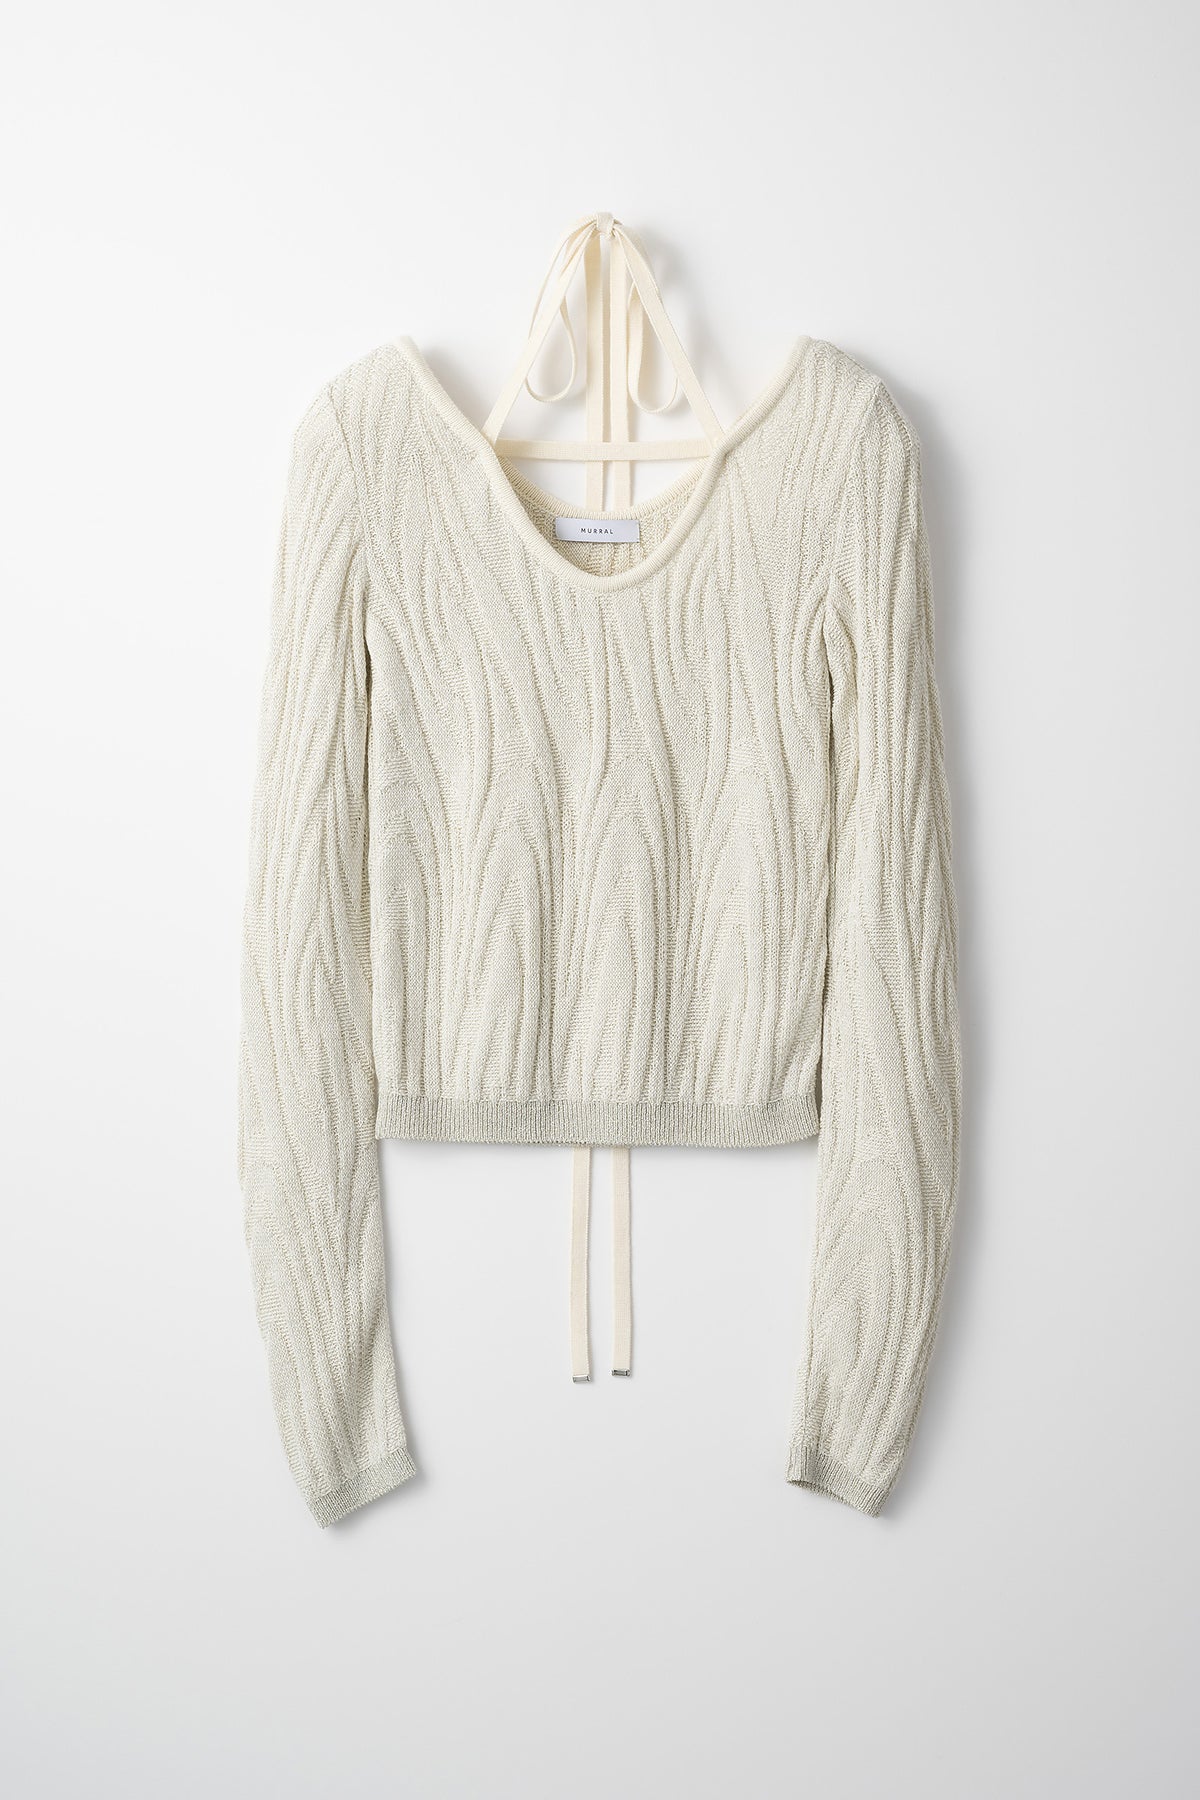 Frost knit top (Ivory)